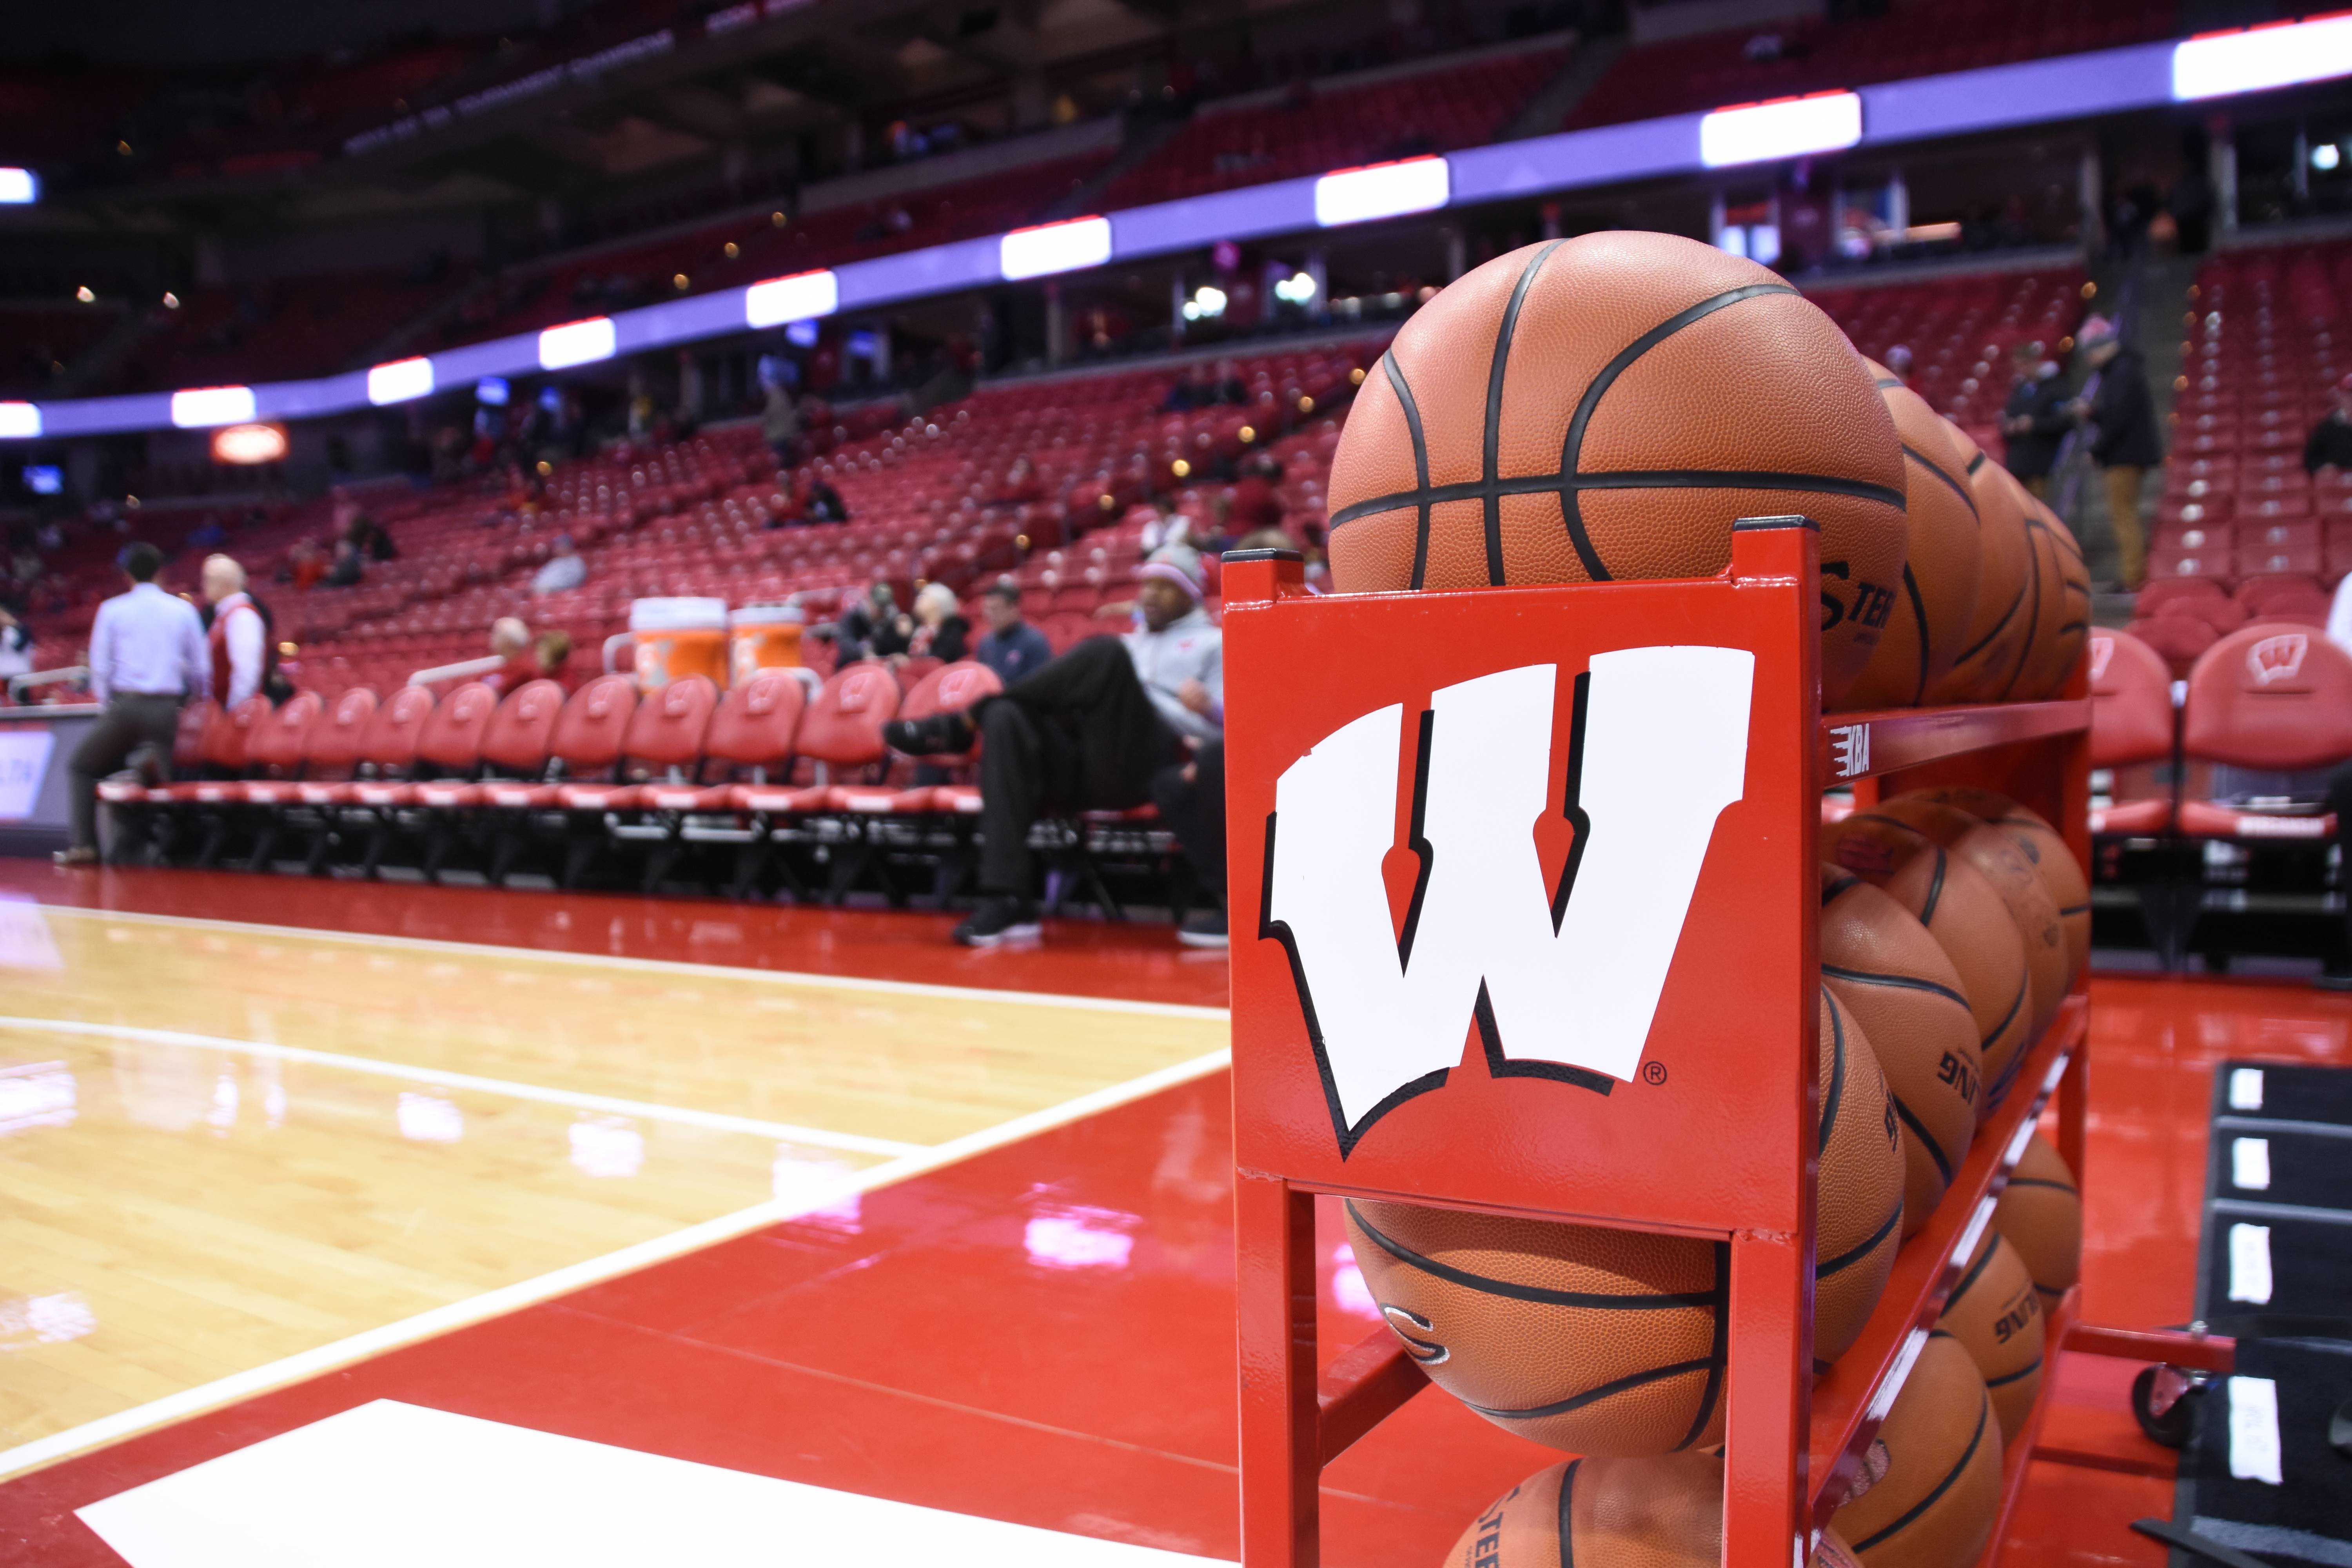 Wisconsin Basketball gets a new court 🏀💯 